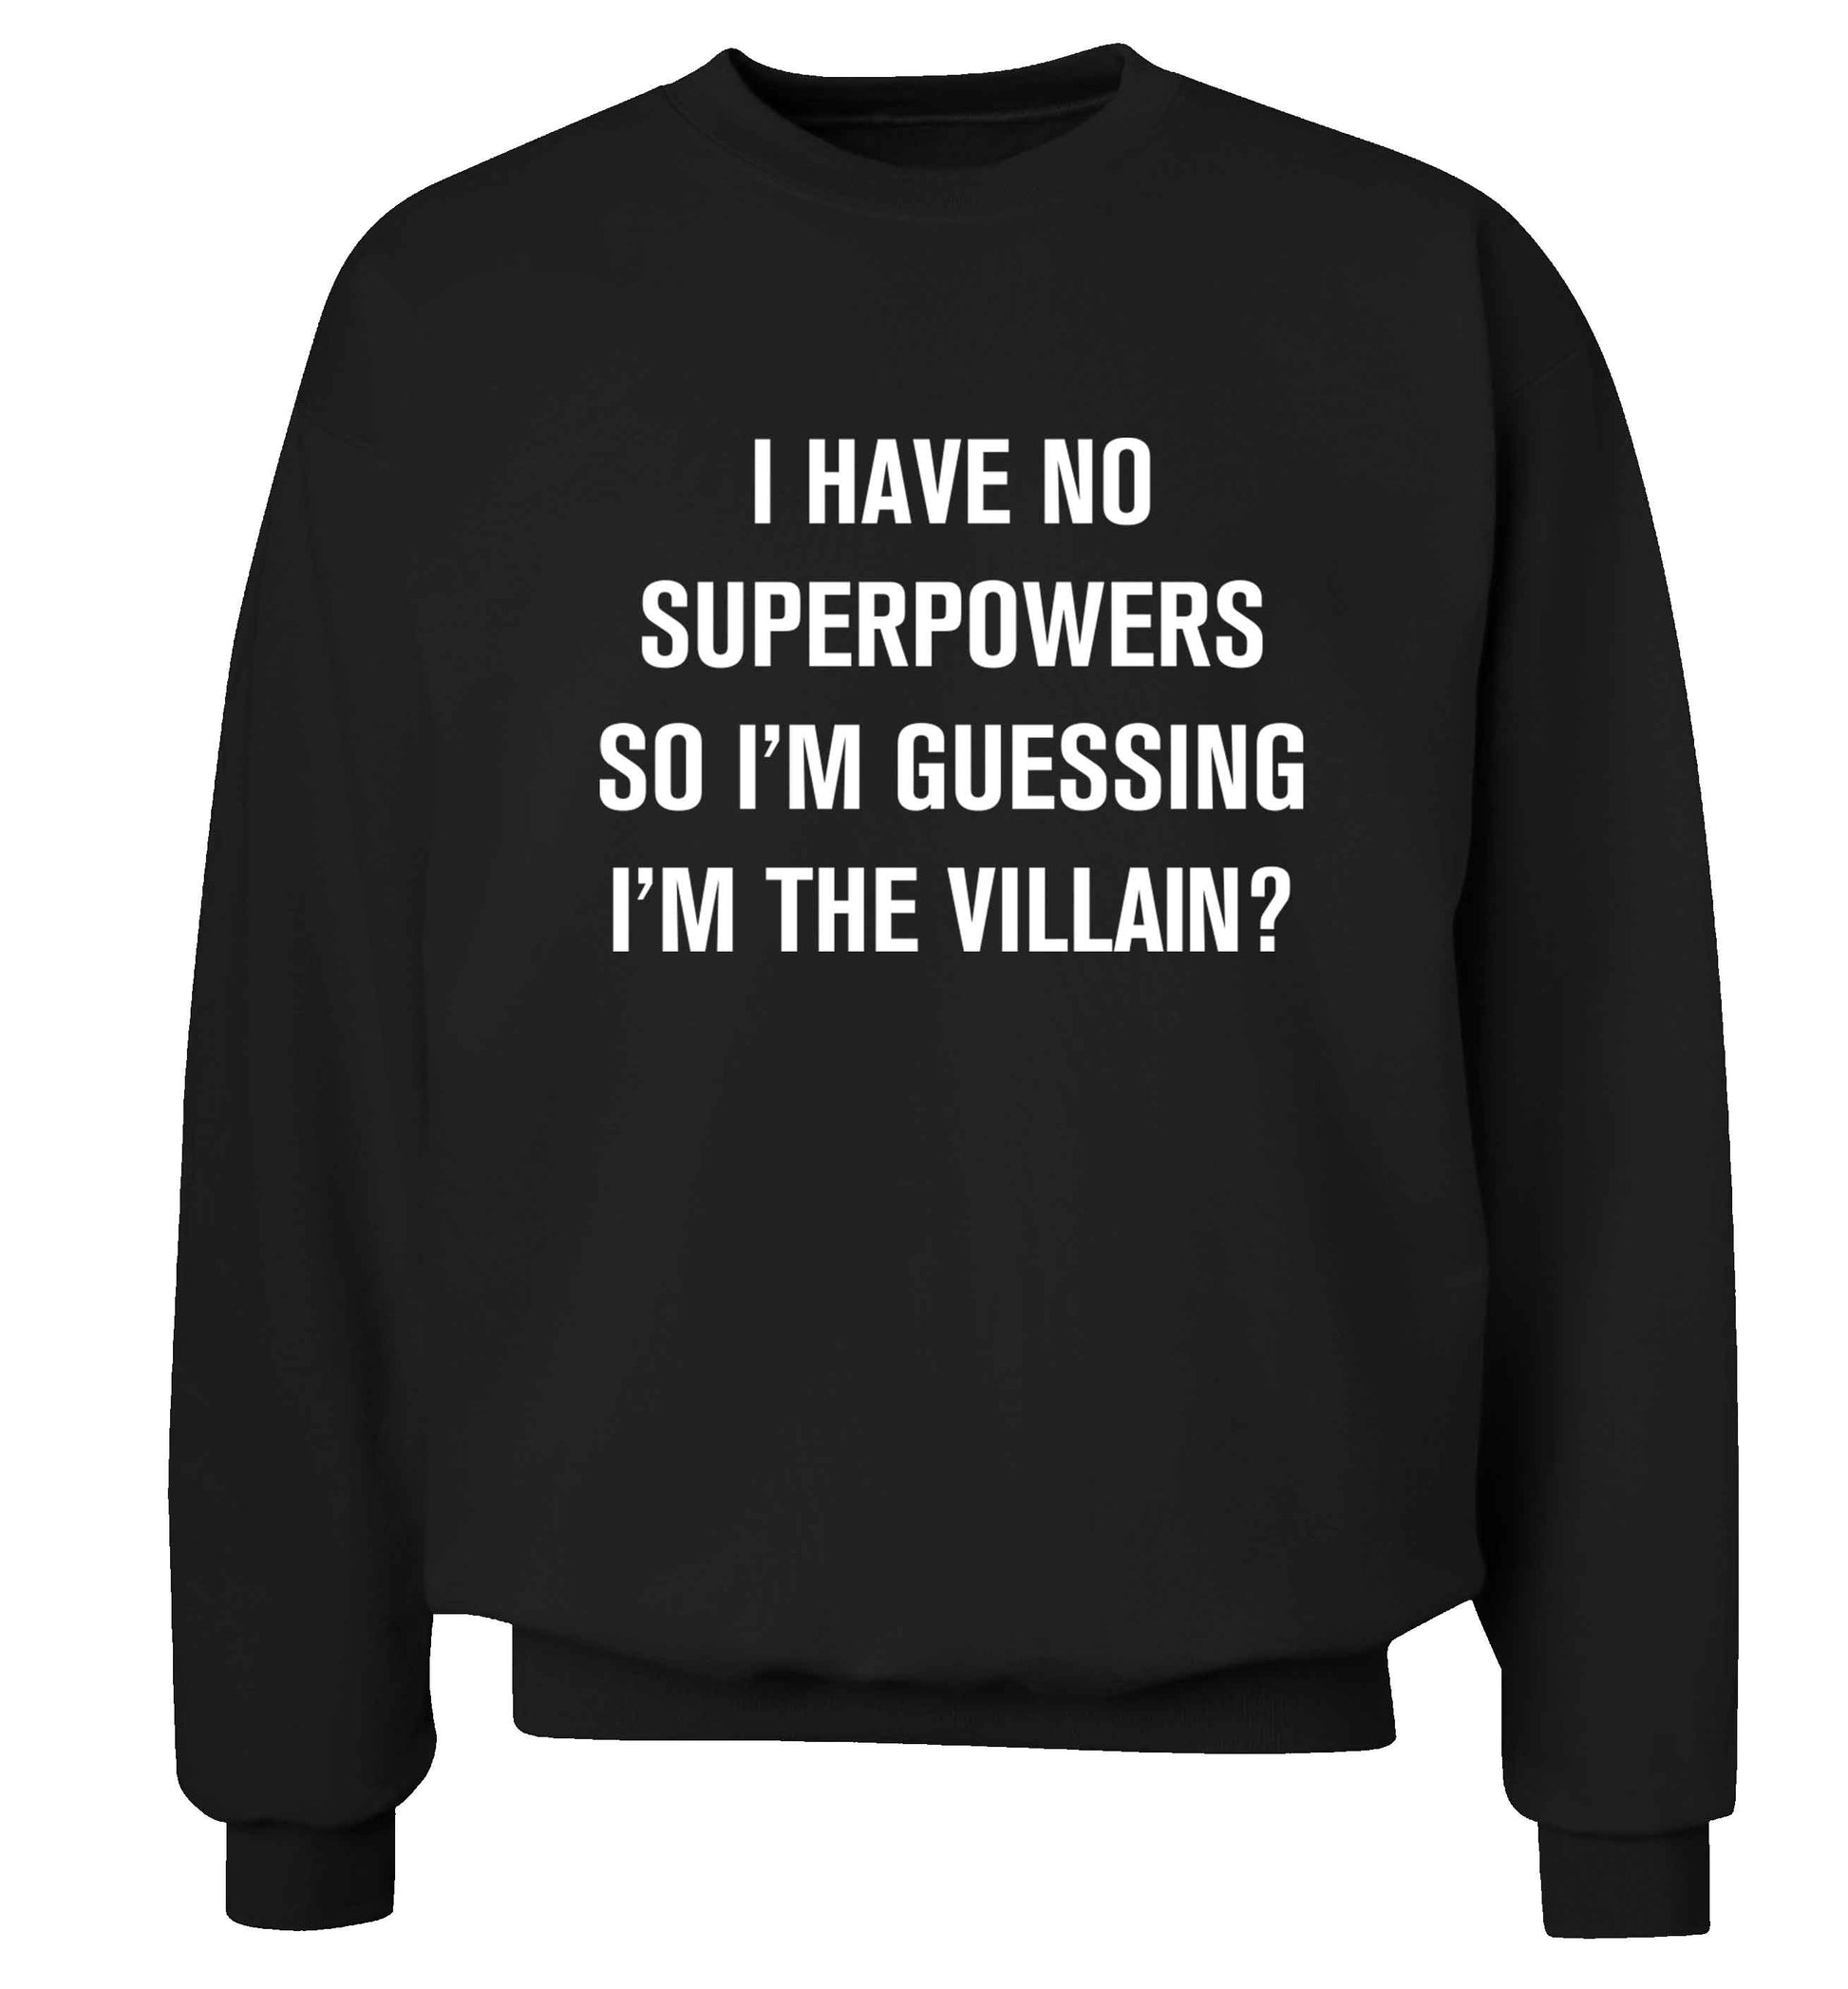 I have no superpowers so I'm guessing I'm the villain? Adult's unisex black Sweater 2XL